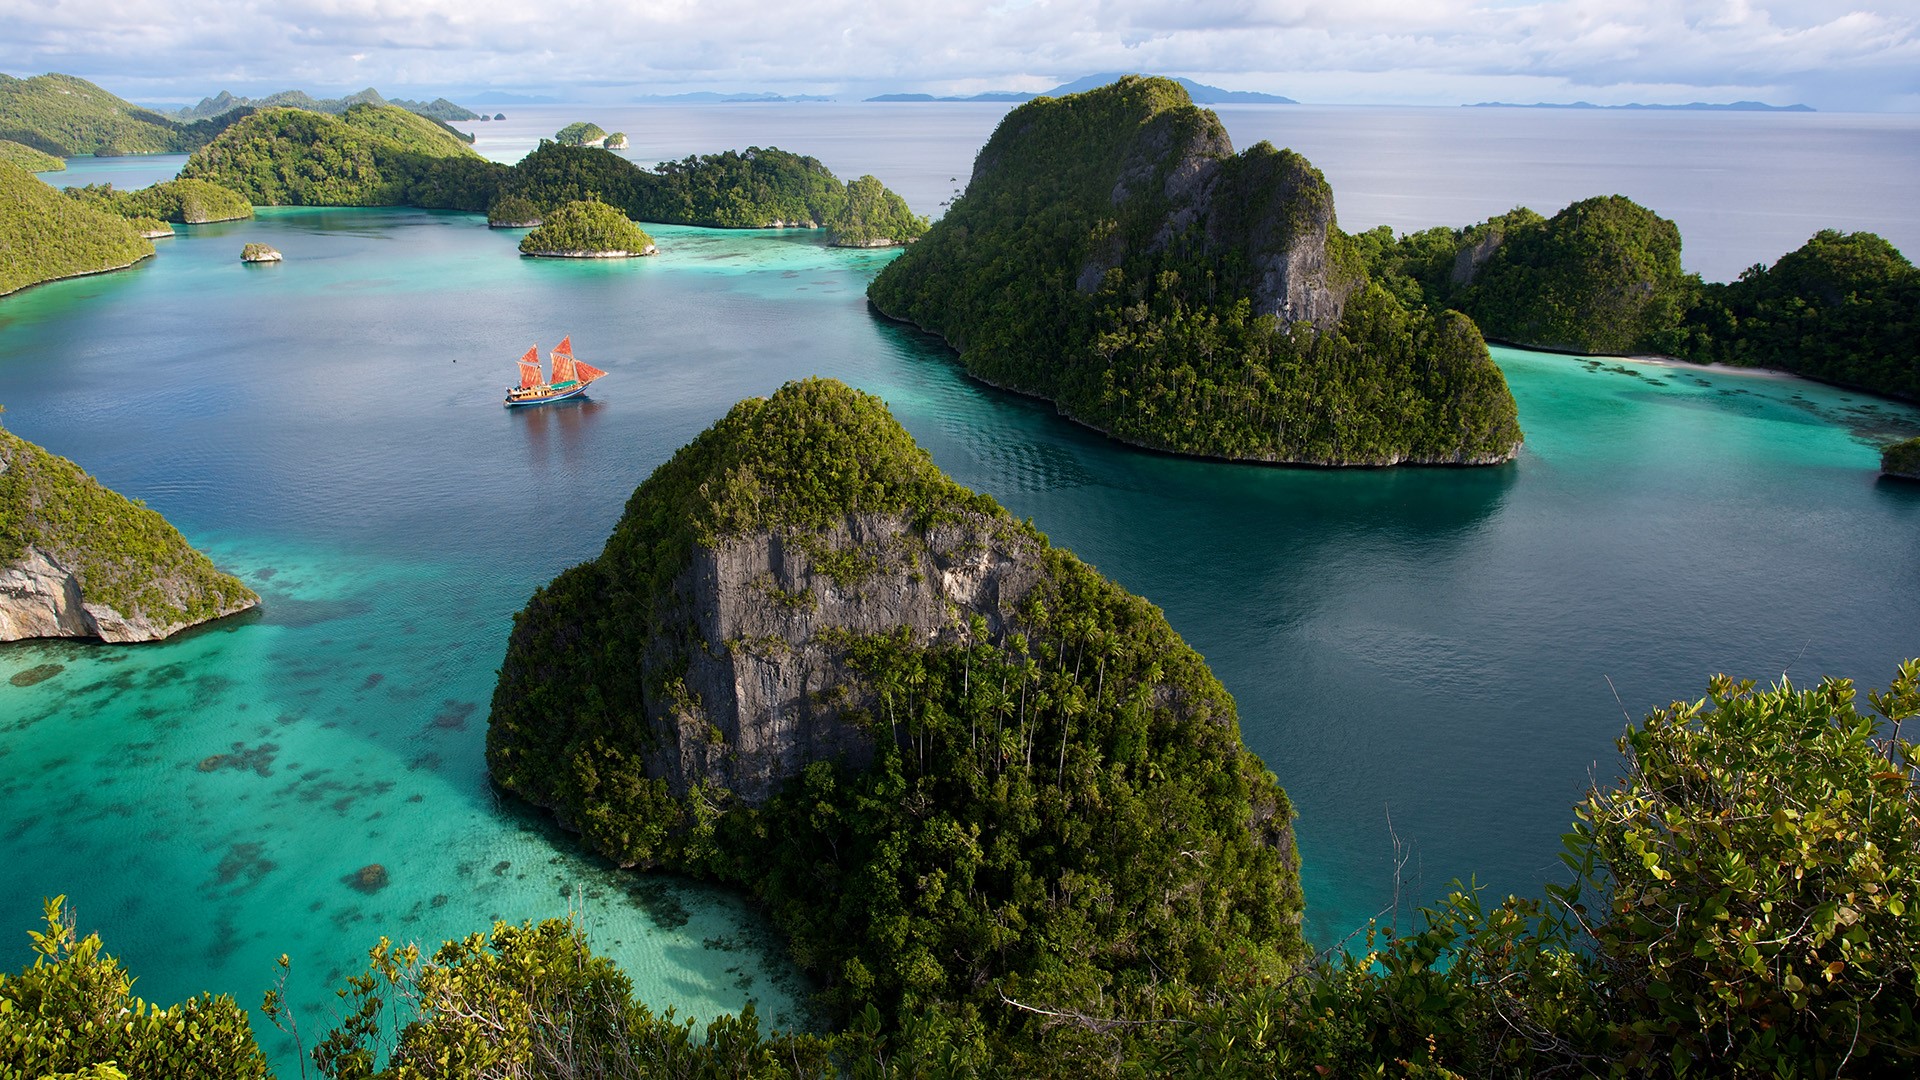 General 1920x1080 nature landscape island sailing ship clouds sky clear water trees plants Raja Ampat Indonesia